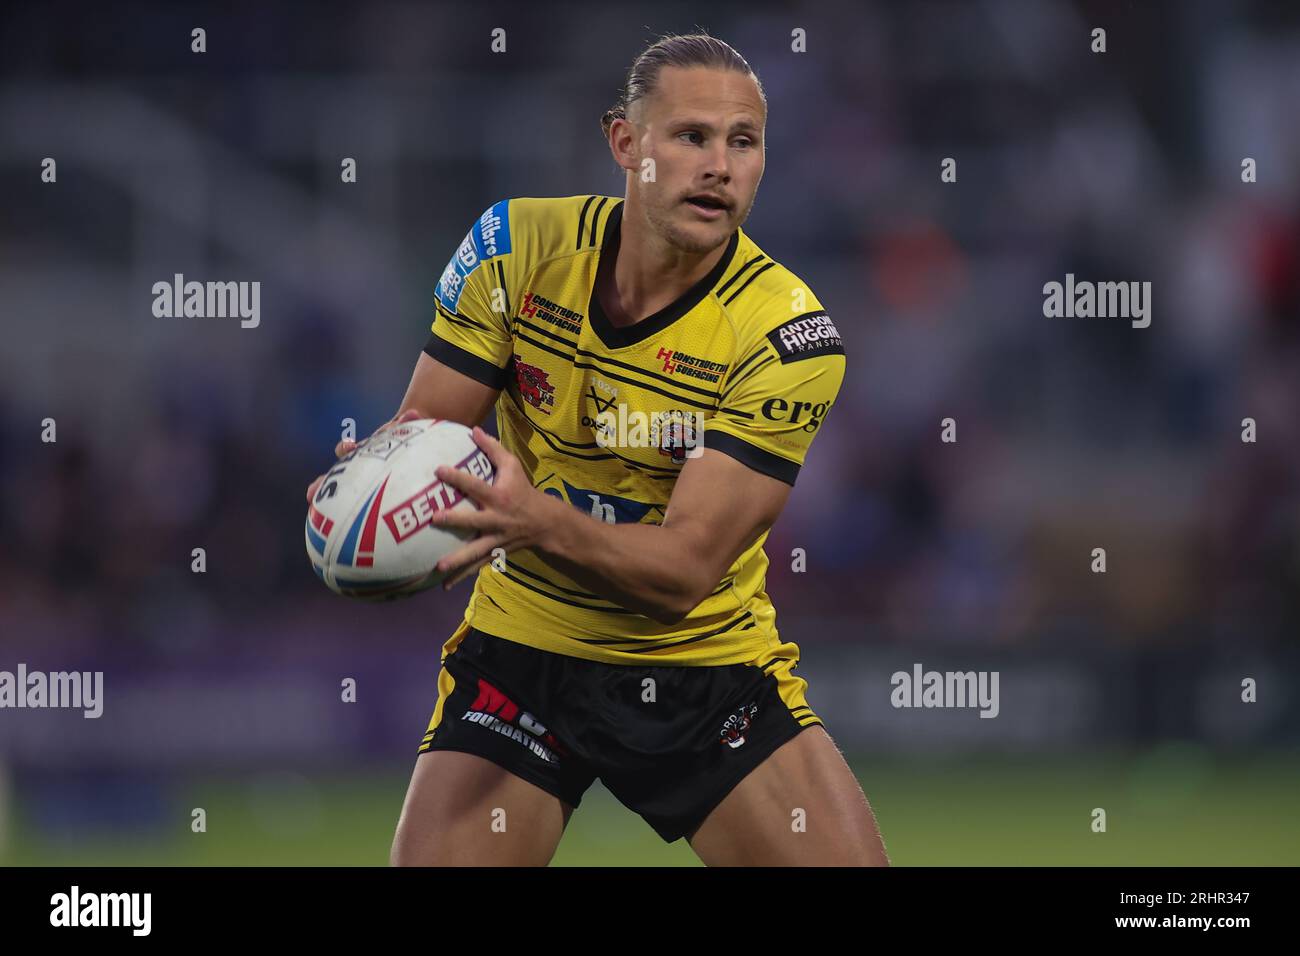 Wakefield, Royaume-Uni. 18 août 2023. Be Well support Stadium, Wakefield, West Yorkshire, 18 août 2023. Betfred Super League Wakefield Trinity vs Castleford Tigers Jacob Miller de Castleford Tigers crédit : Touchlinepics/Alamy Live News Banque D'Images